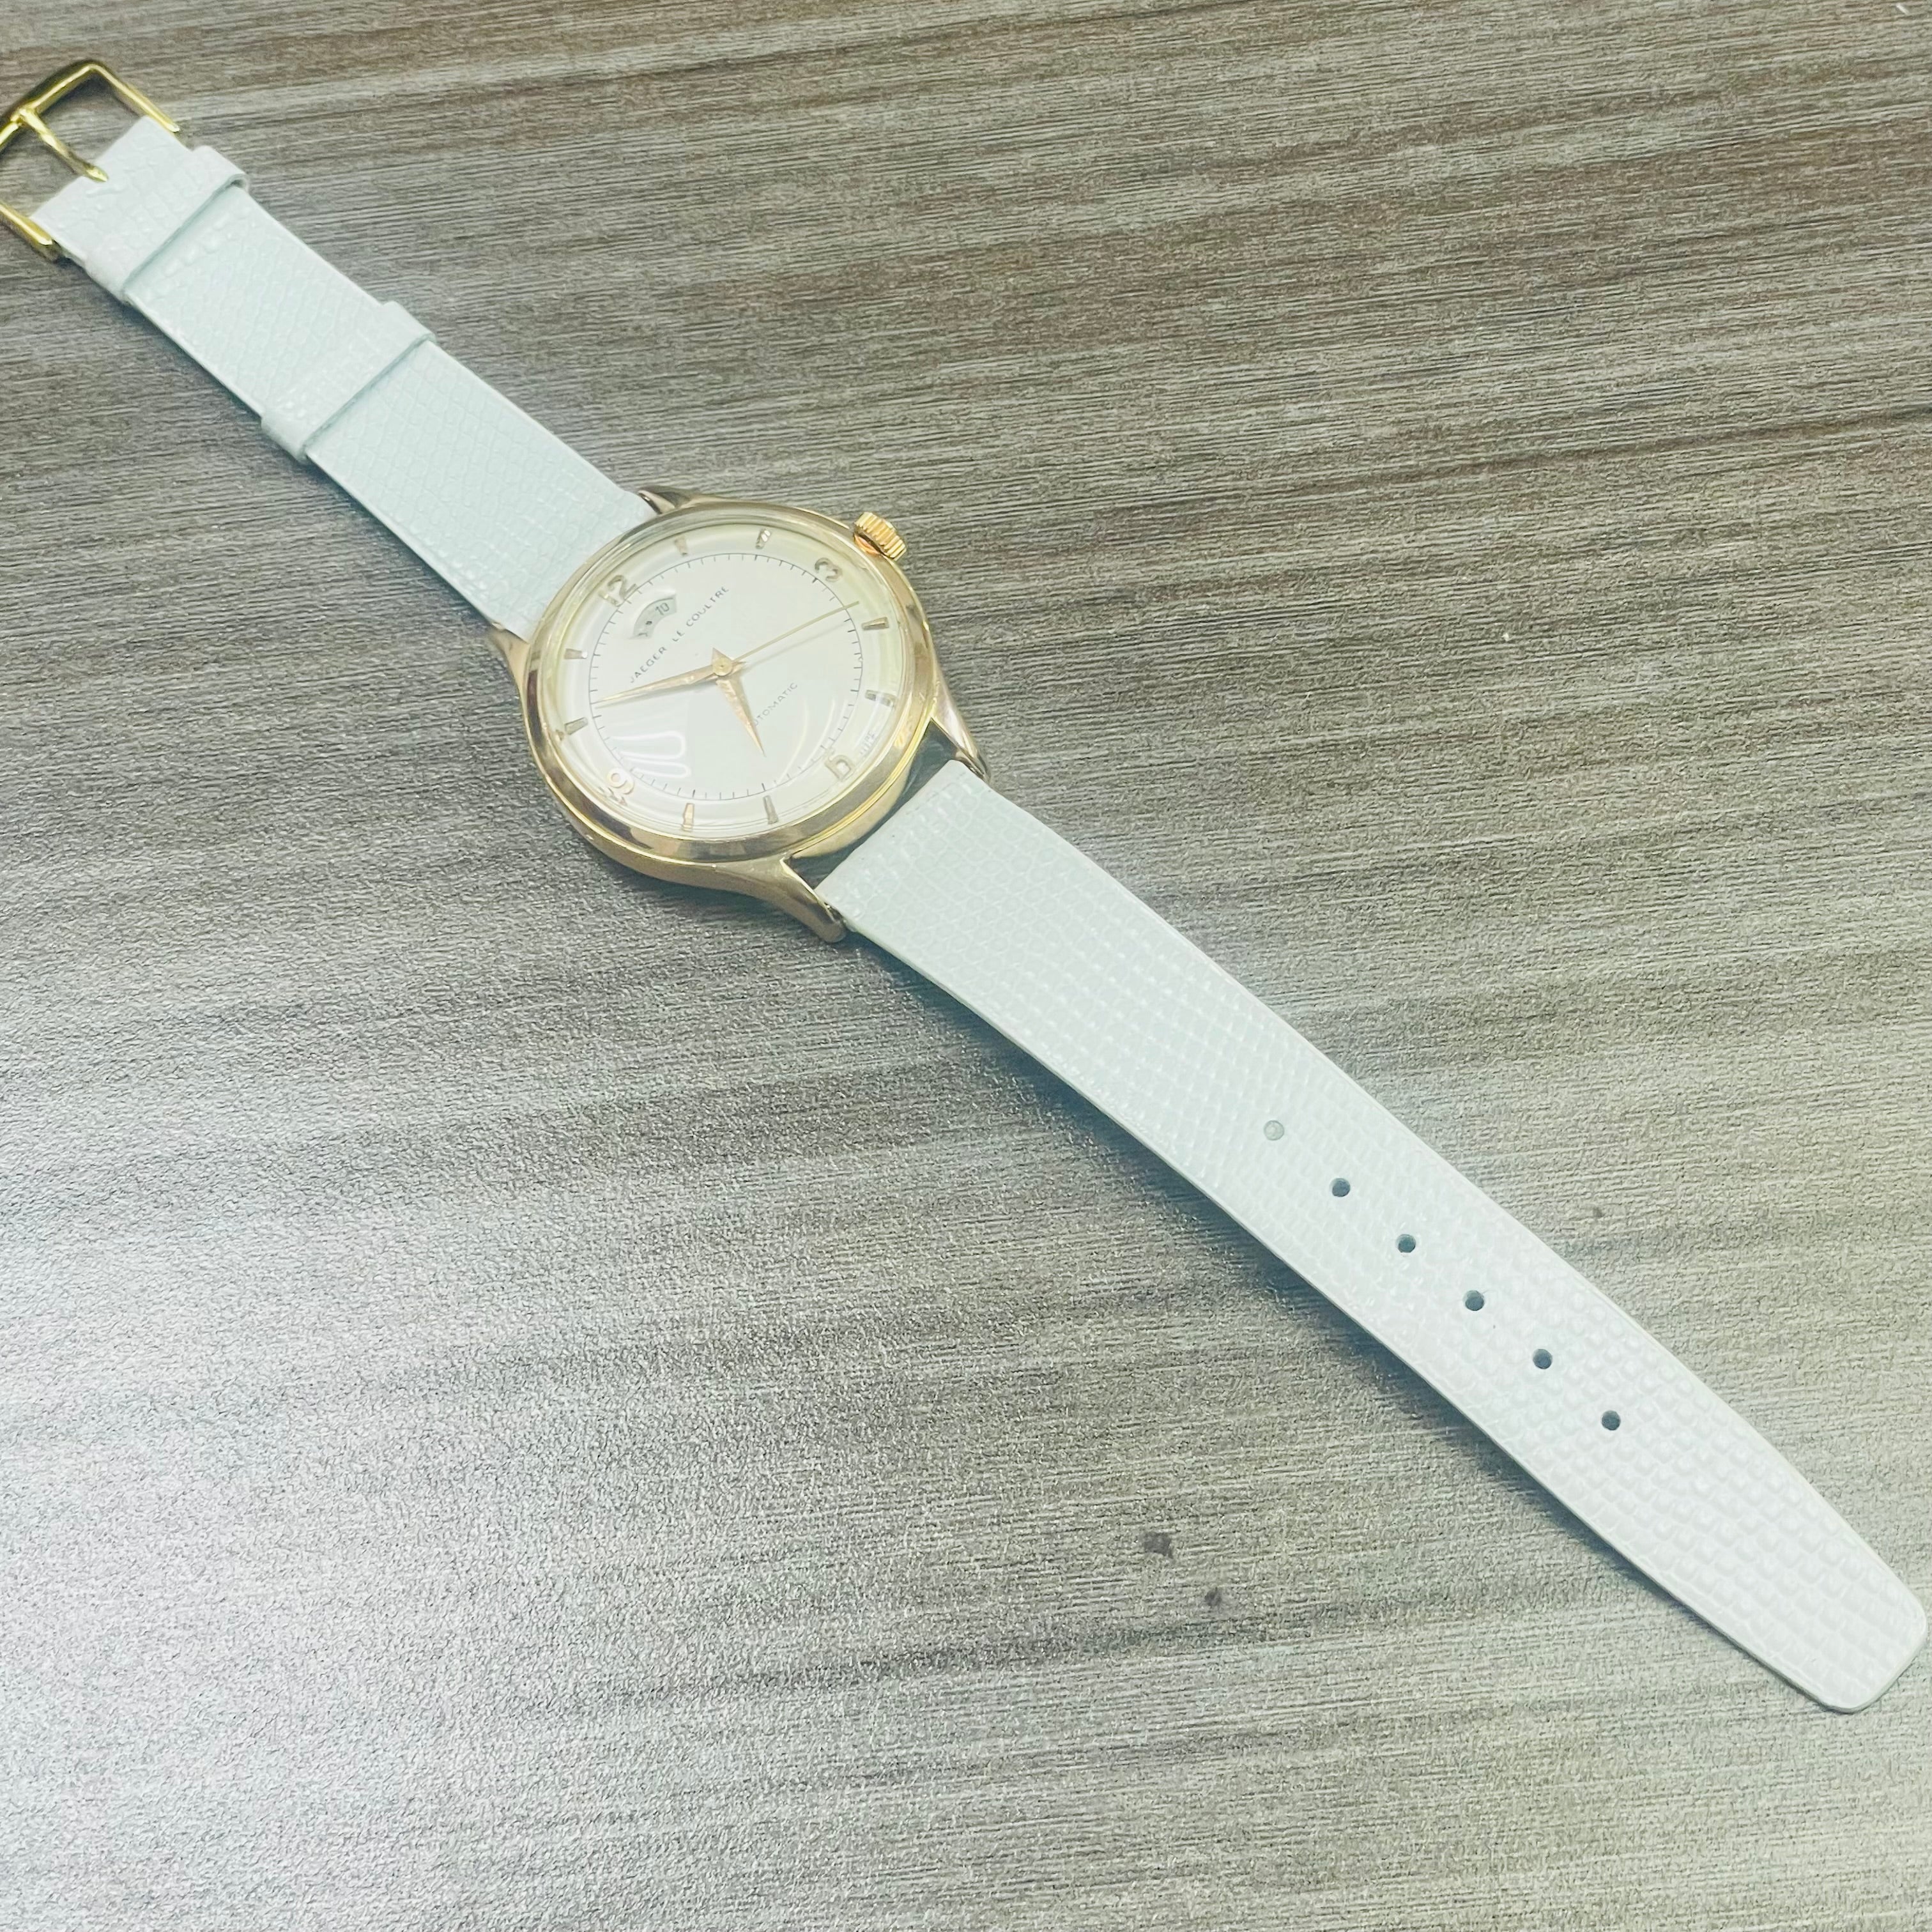 34mm Jaeger-LeCoultre Solid 18K Rose Gold Power Reserve Bumper Automatic Wristwatch with Leather Strap